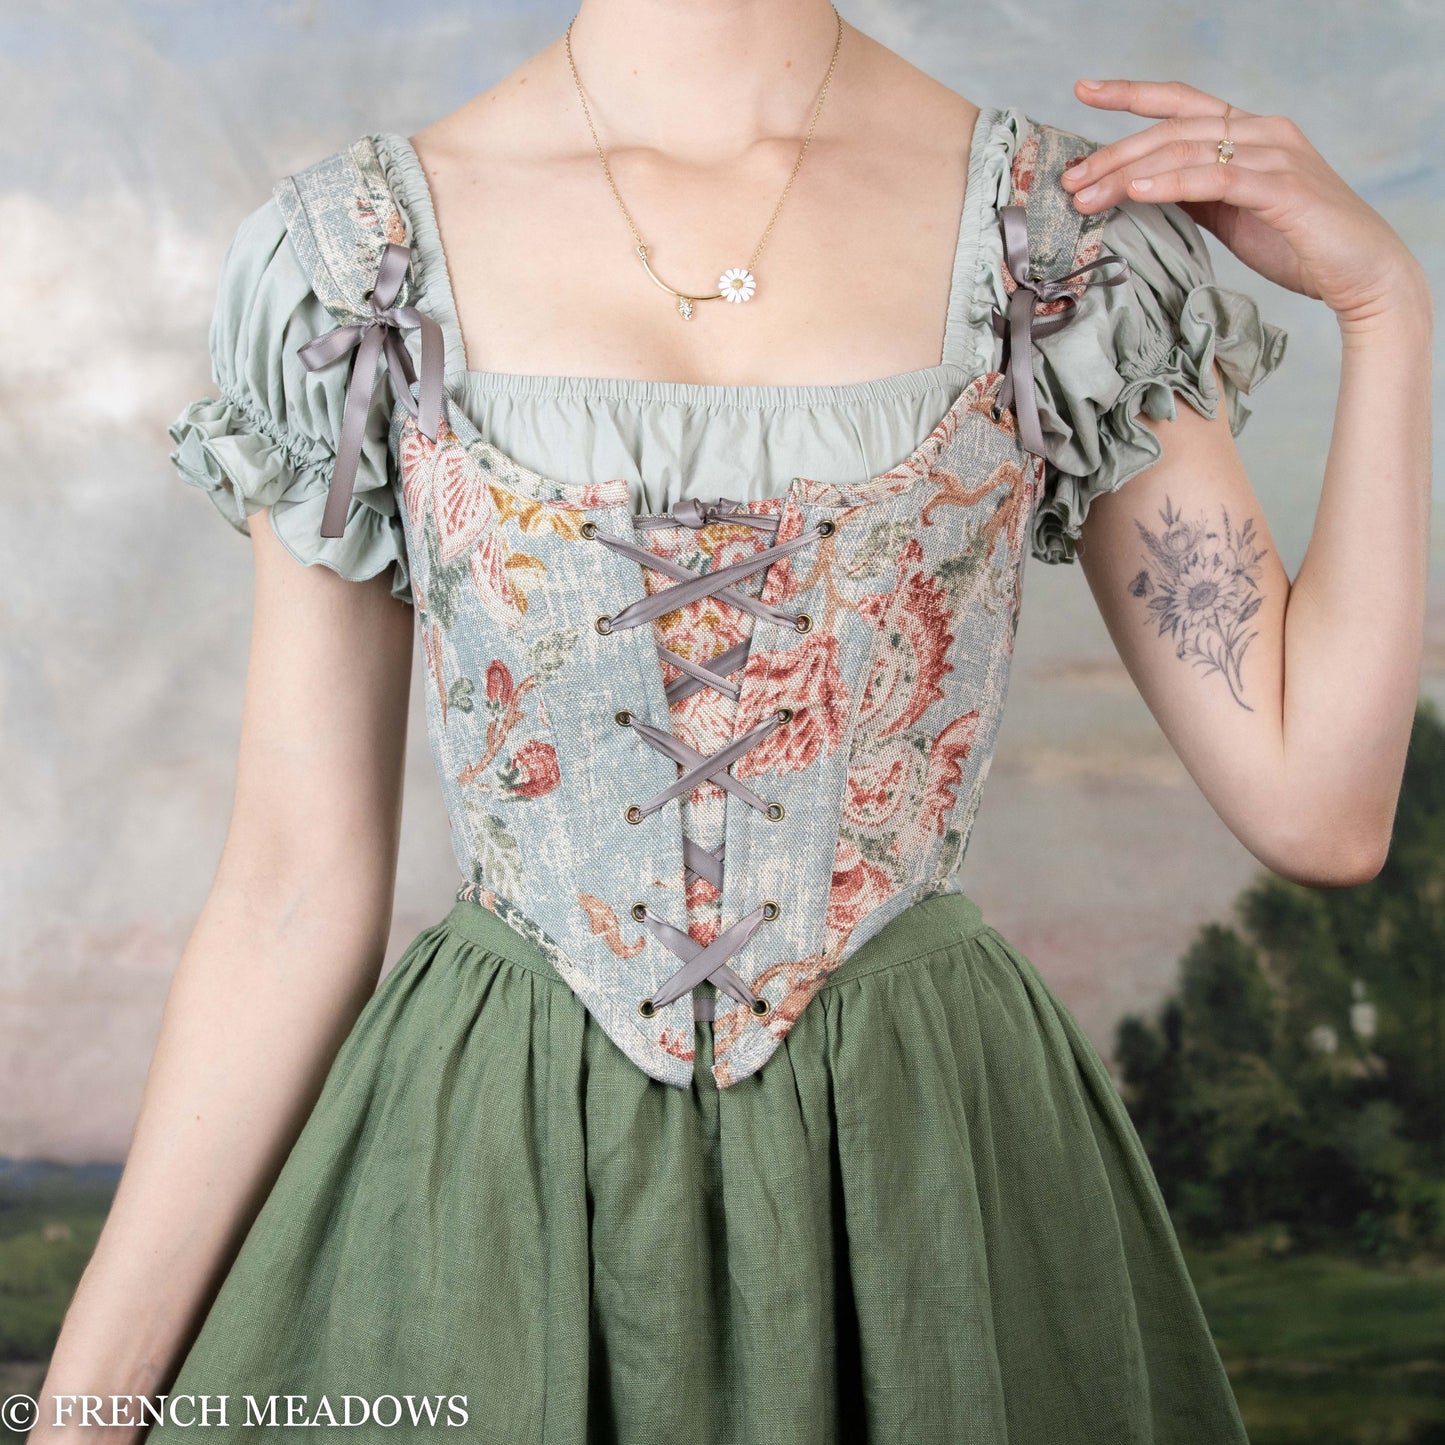  My Orders Placed Corset Tops for Women Renaissance Off